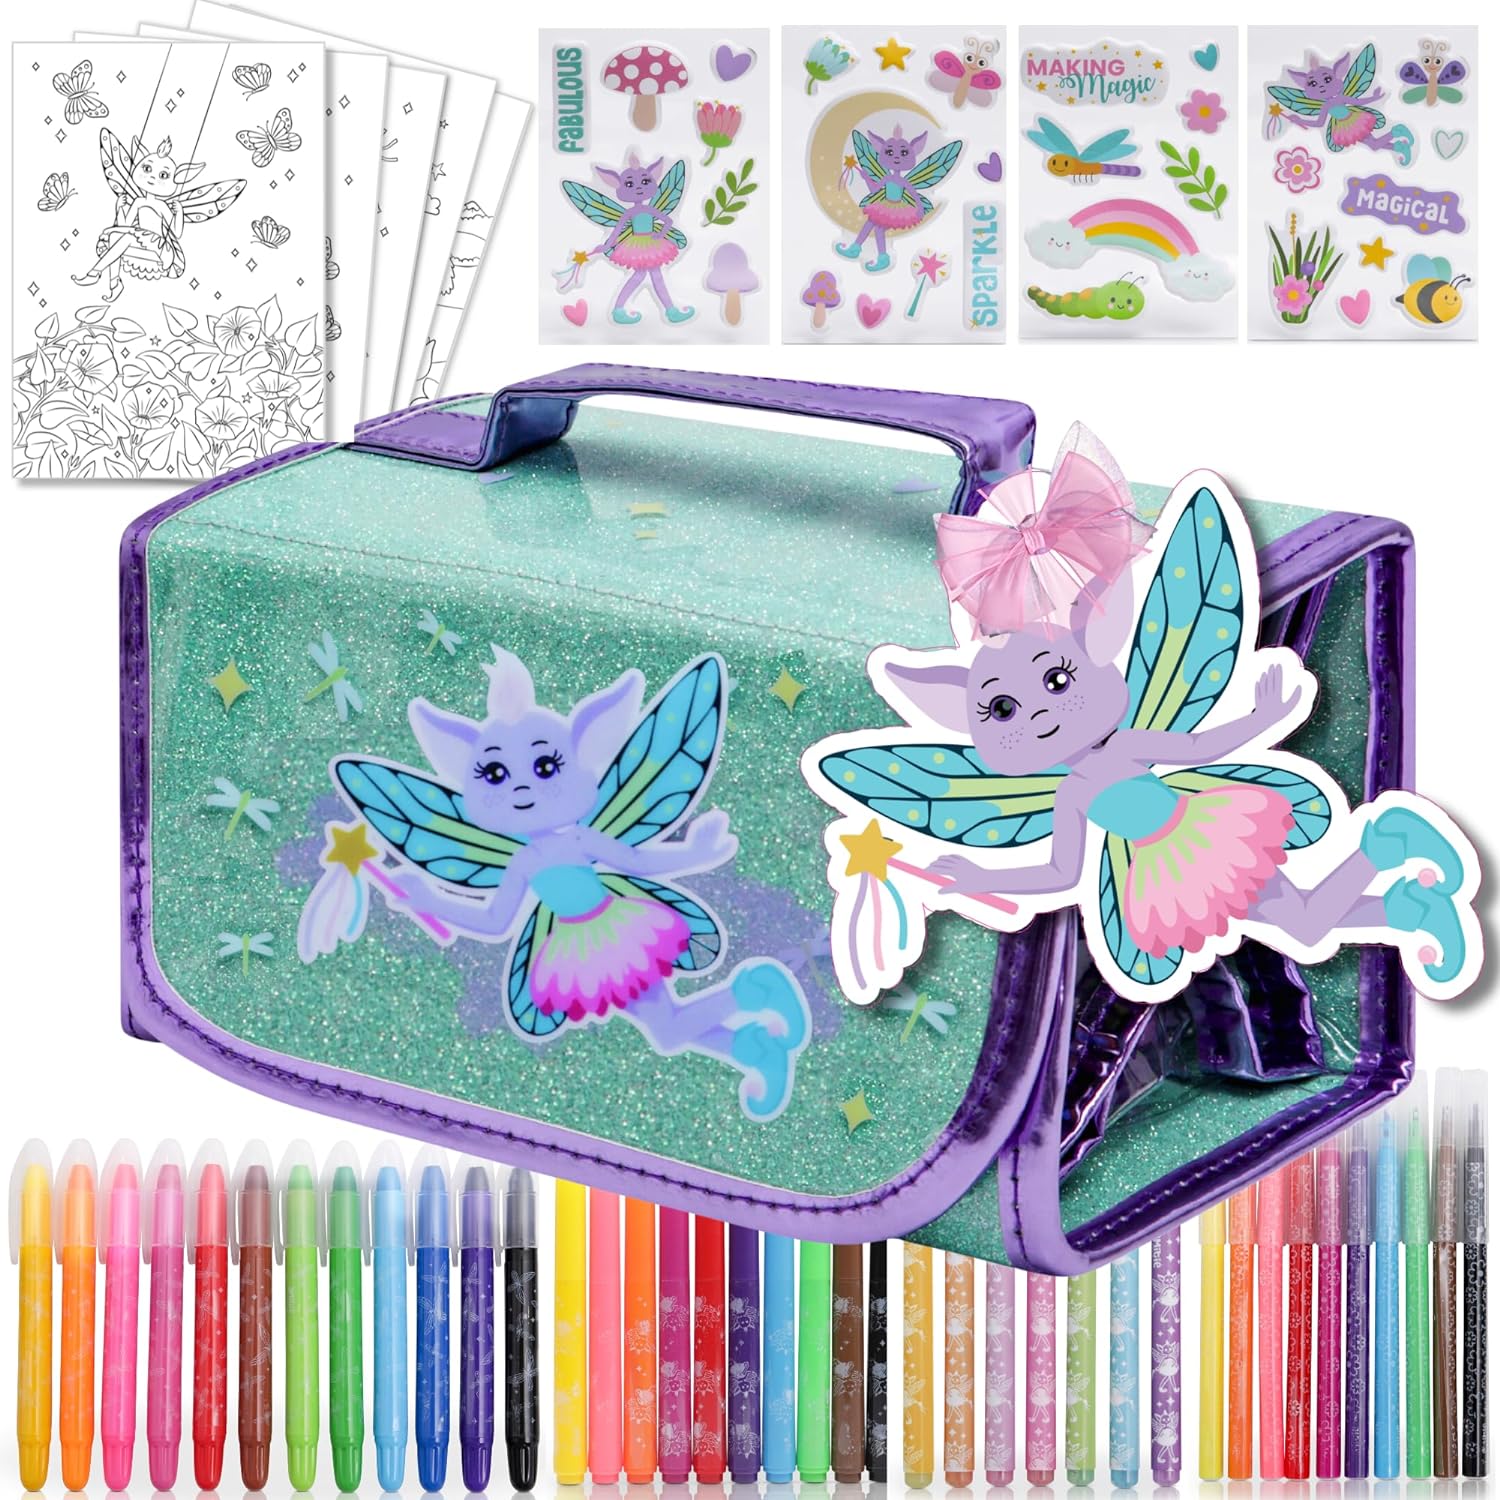 Scented Markers For Kids - Art Kits for Kids 6-9 - Mermaid Gifts For Girls  - Coloring Kit Includes Smelly Markers, Dot Markers, Sparkly Mermaid Pencil